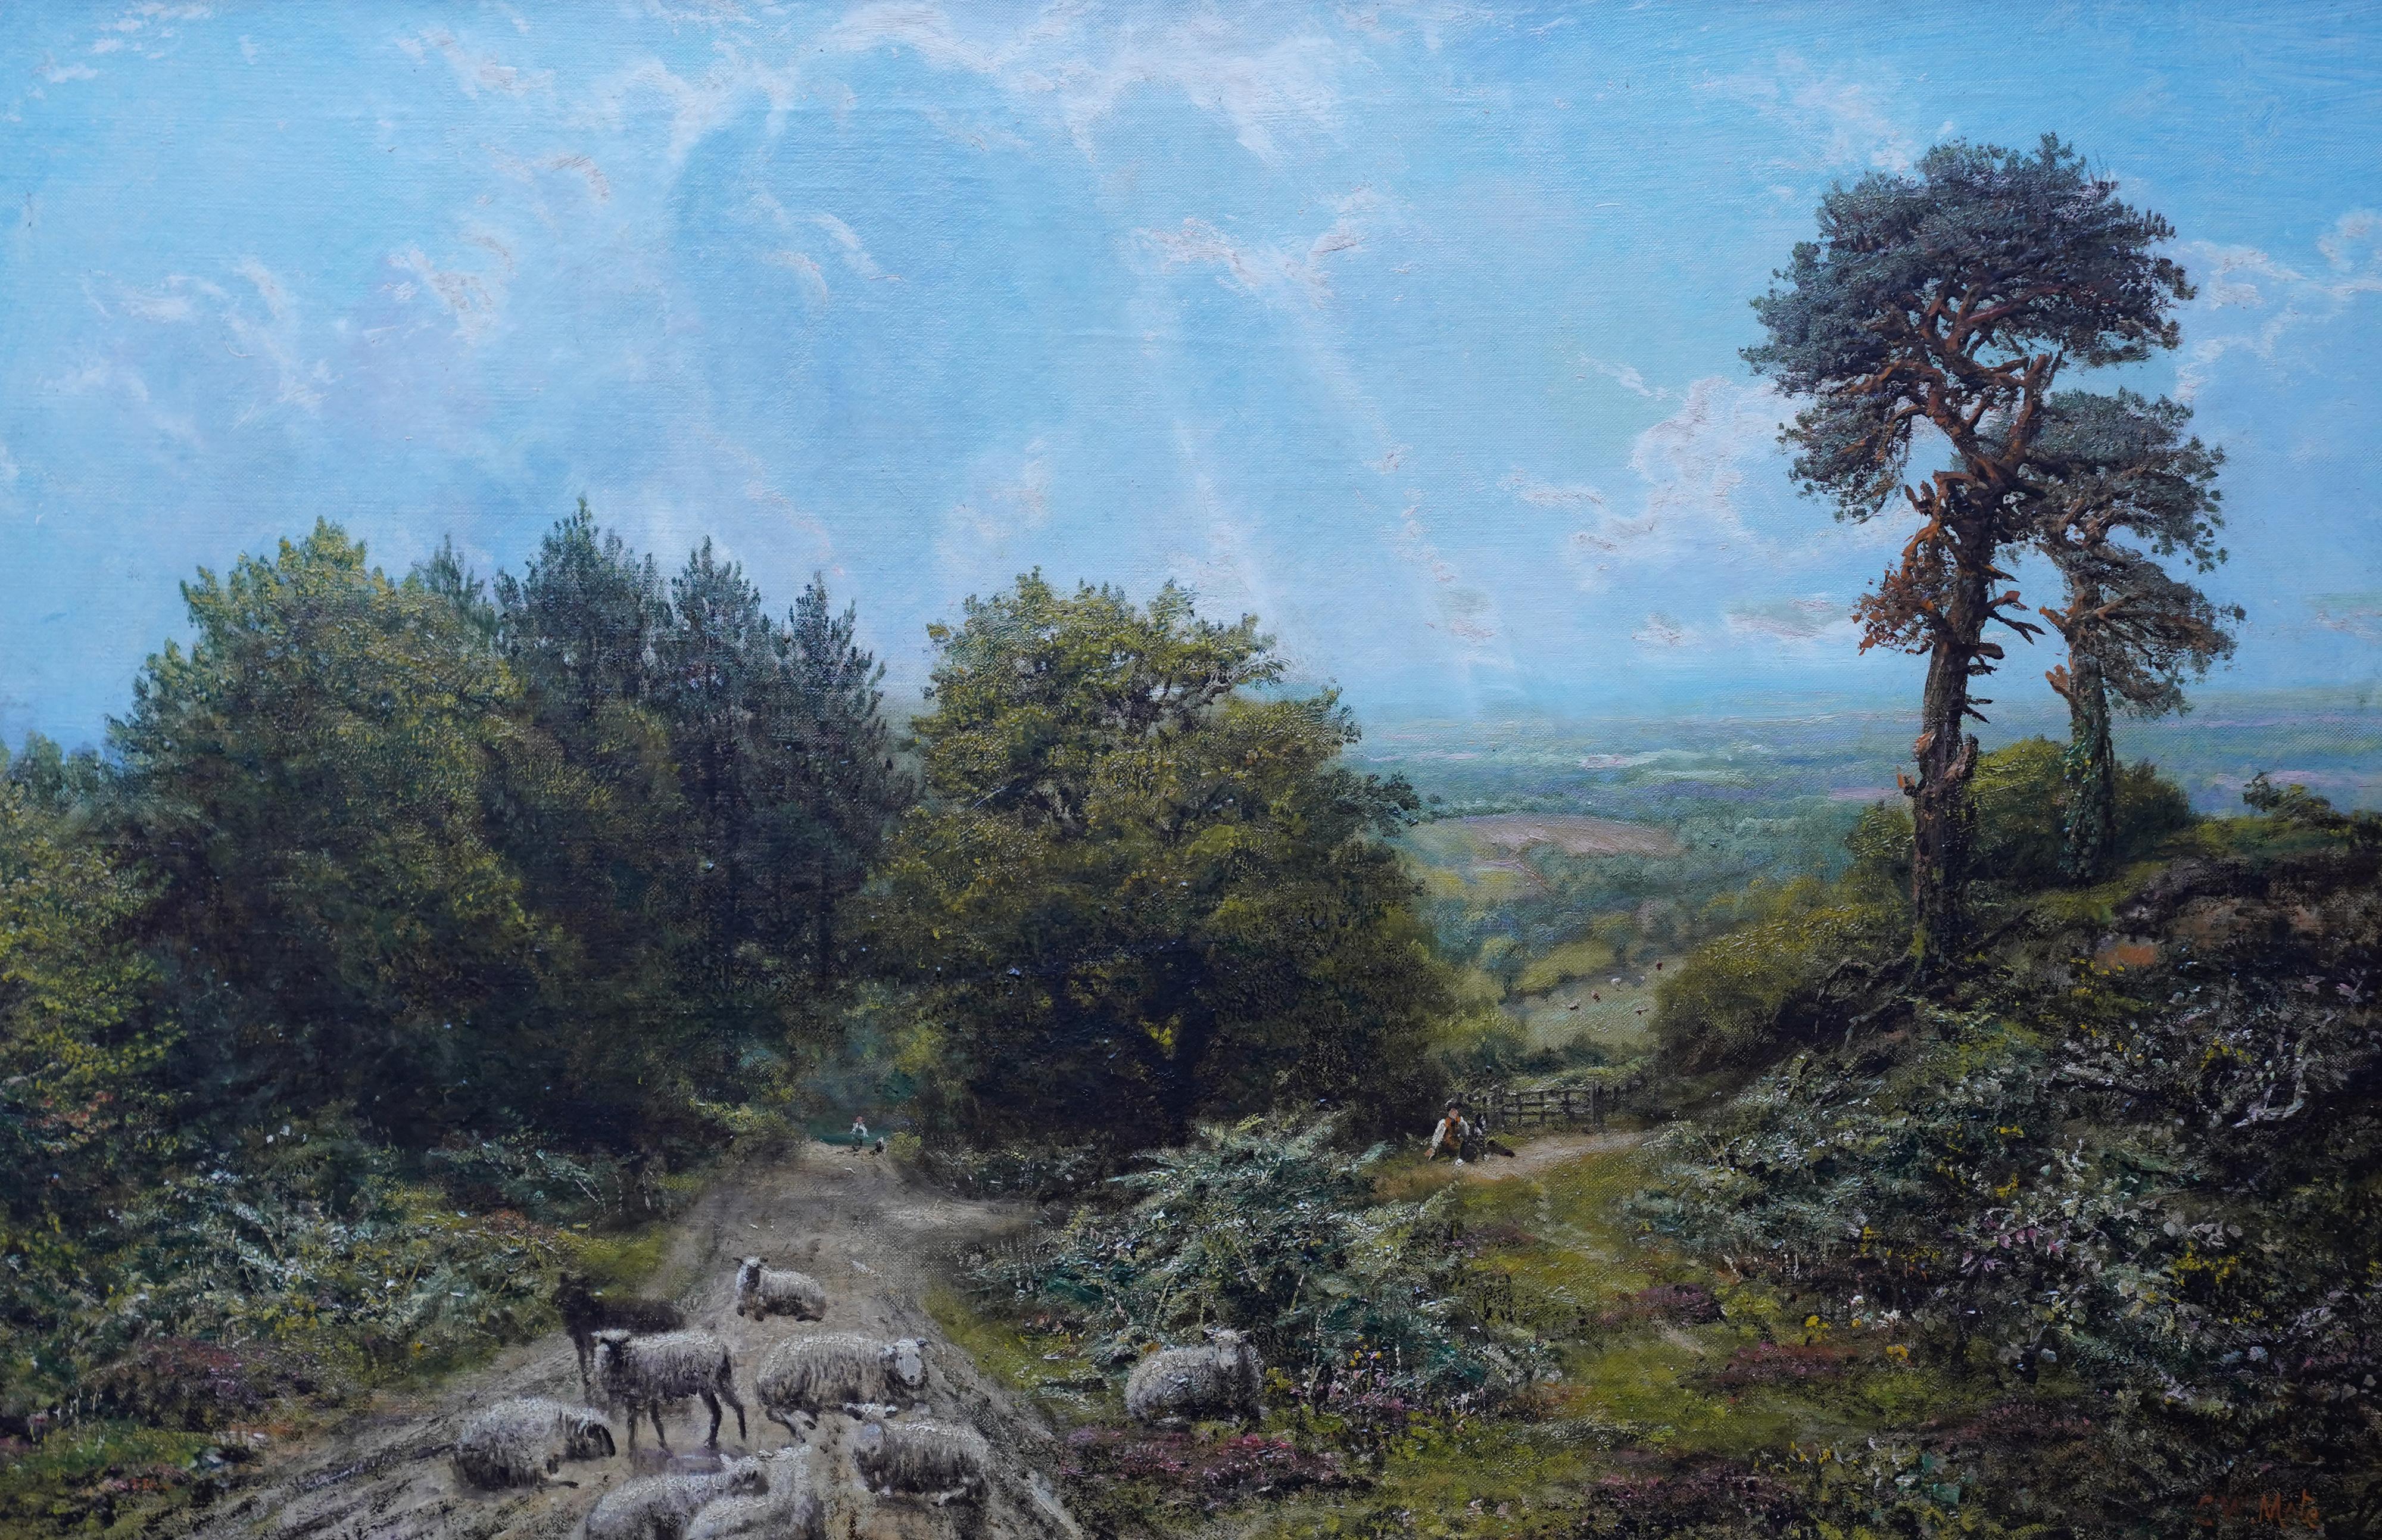 Sheep in a Surrey Landscape - British Victorian art sunny landscape oil painting - Painting by George William Mote